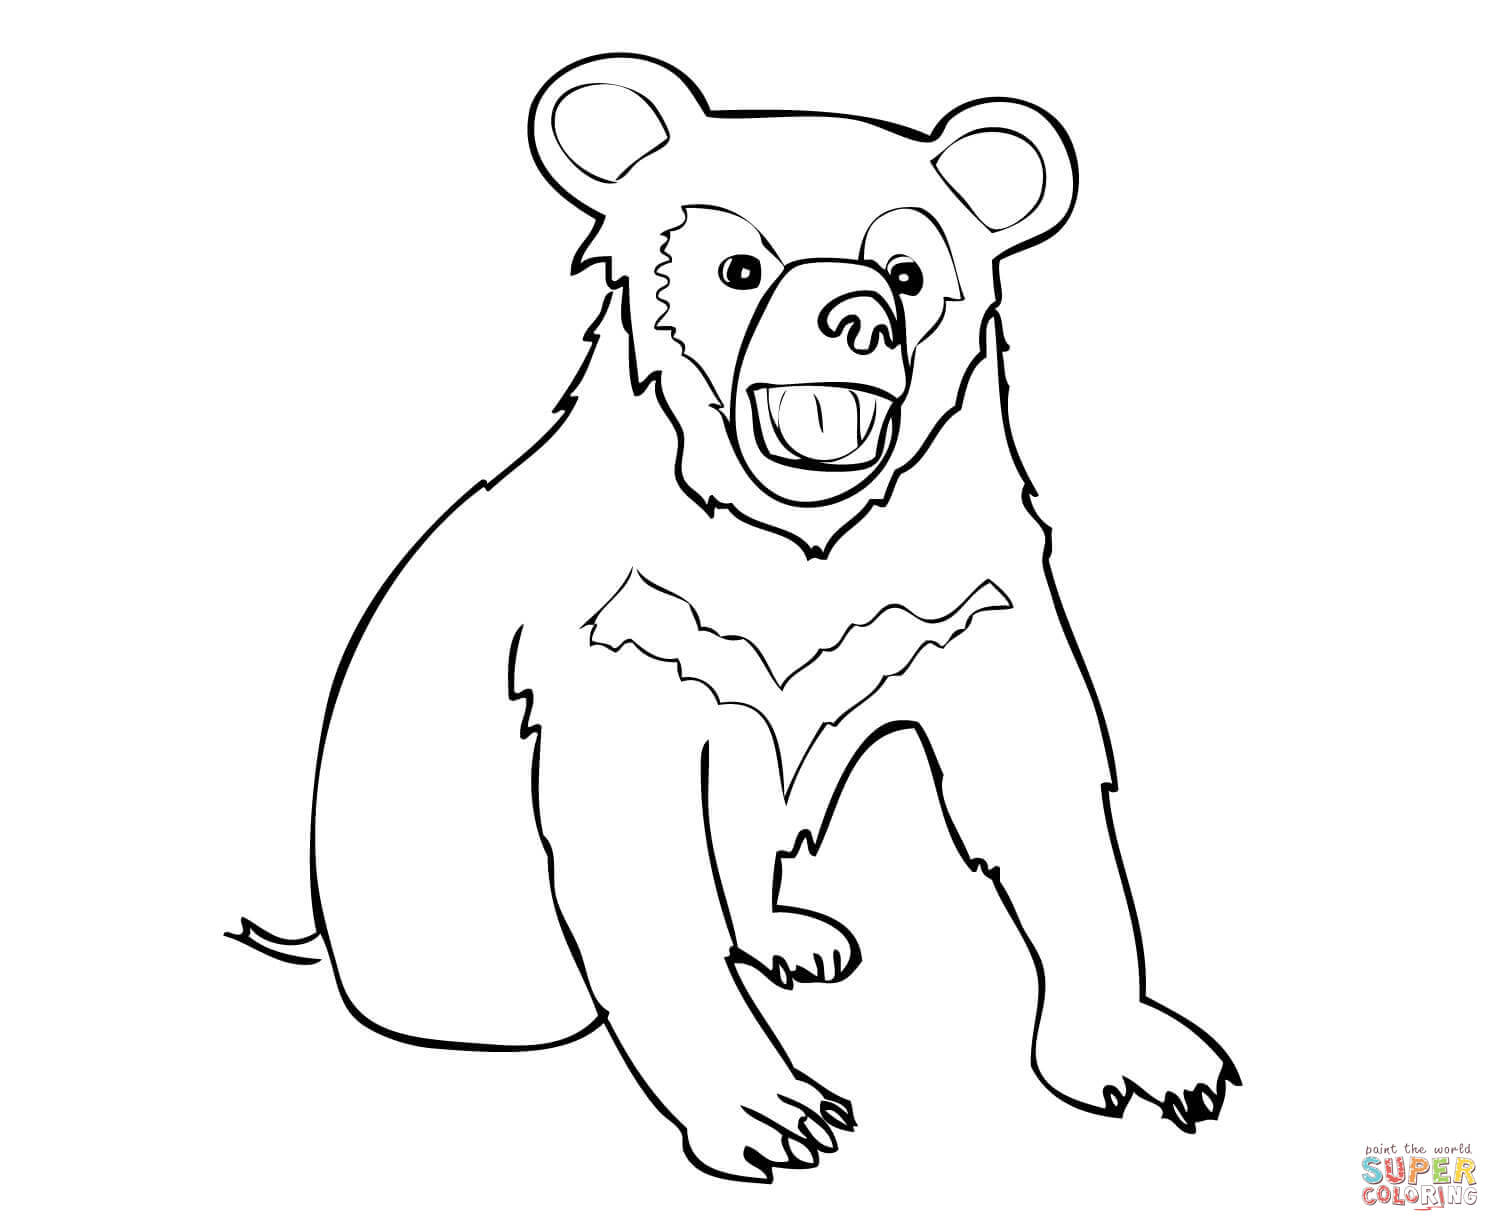 Coloring Pages Of Black Bears Asia Black Bear Cub Coloring Page Free Printable Coloring Pages